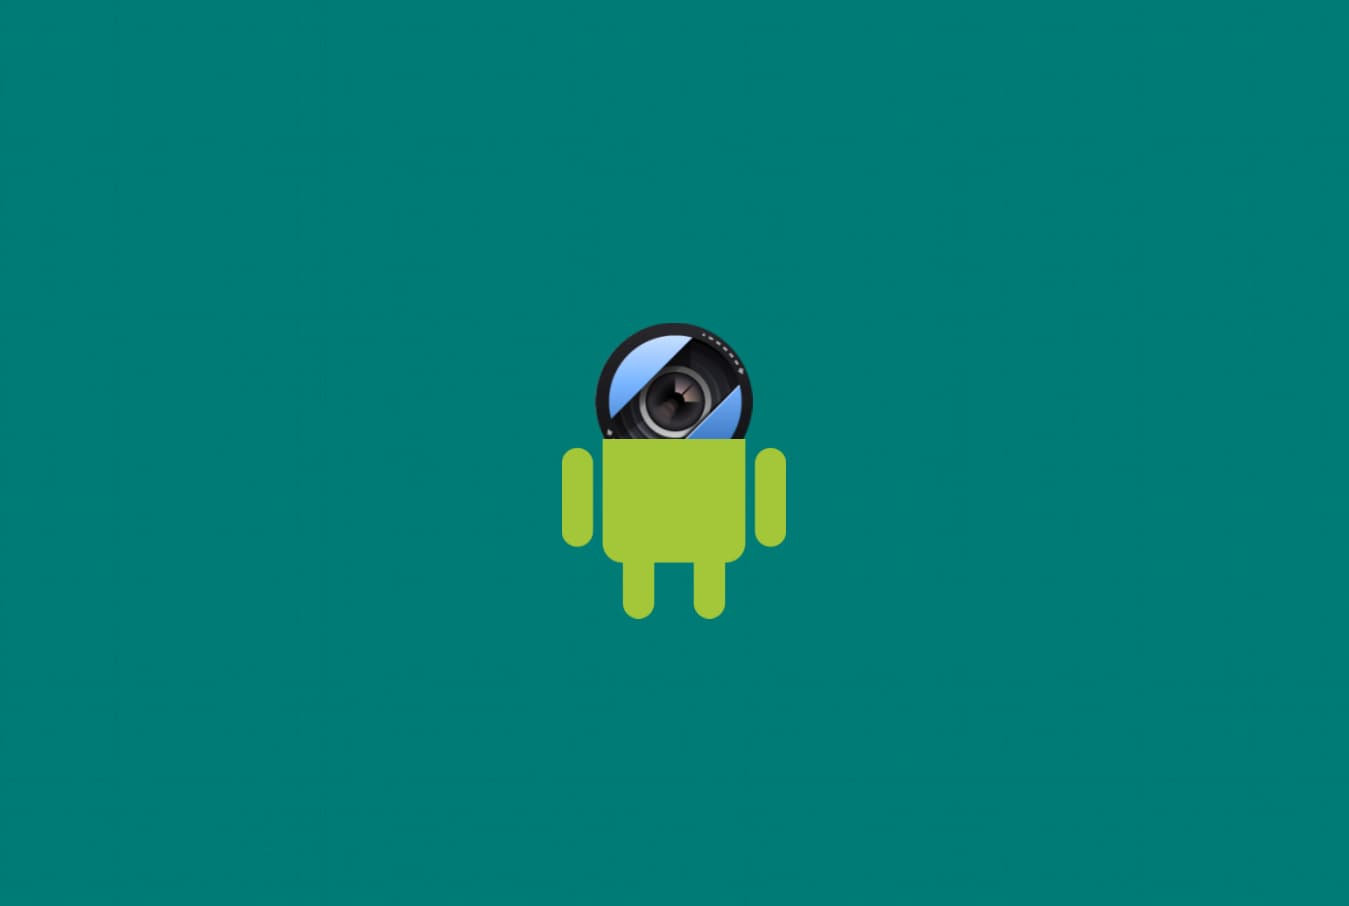 Flaw authorize attackers to spy on users through Android camera